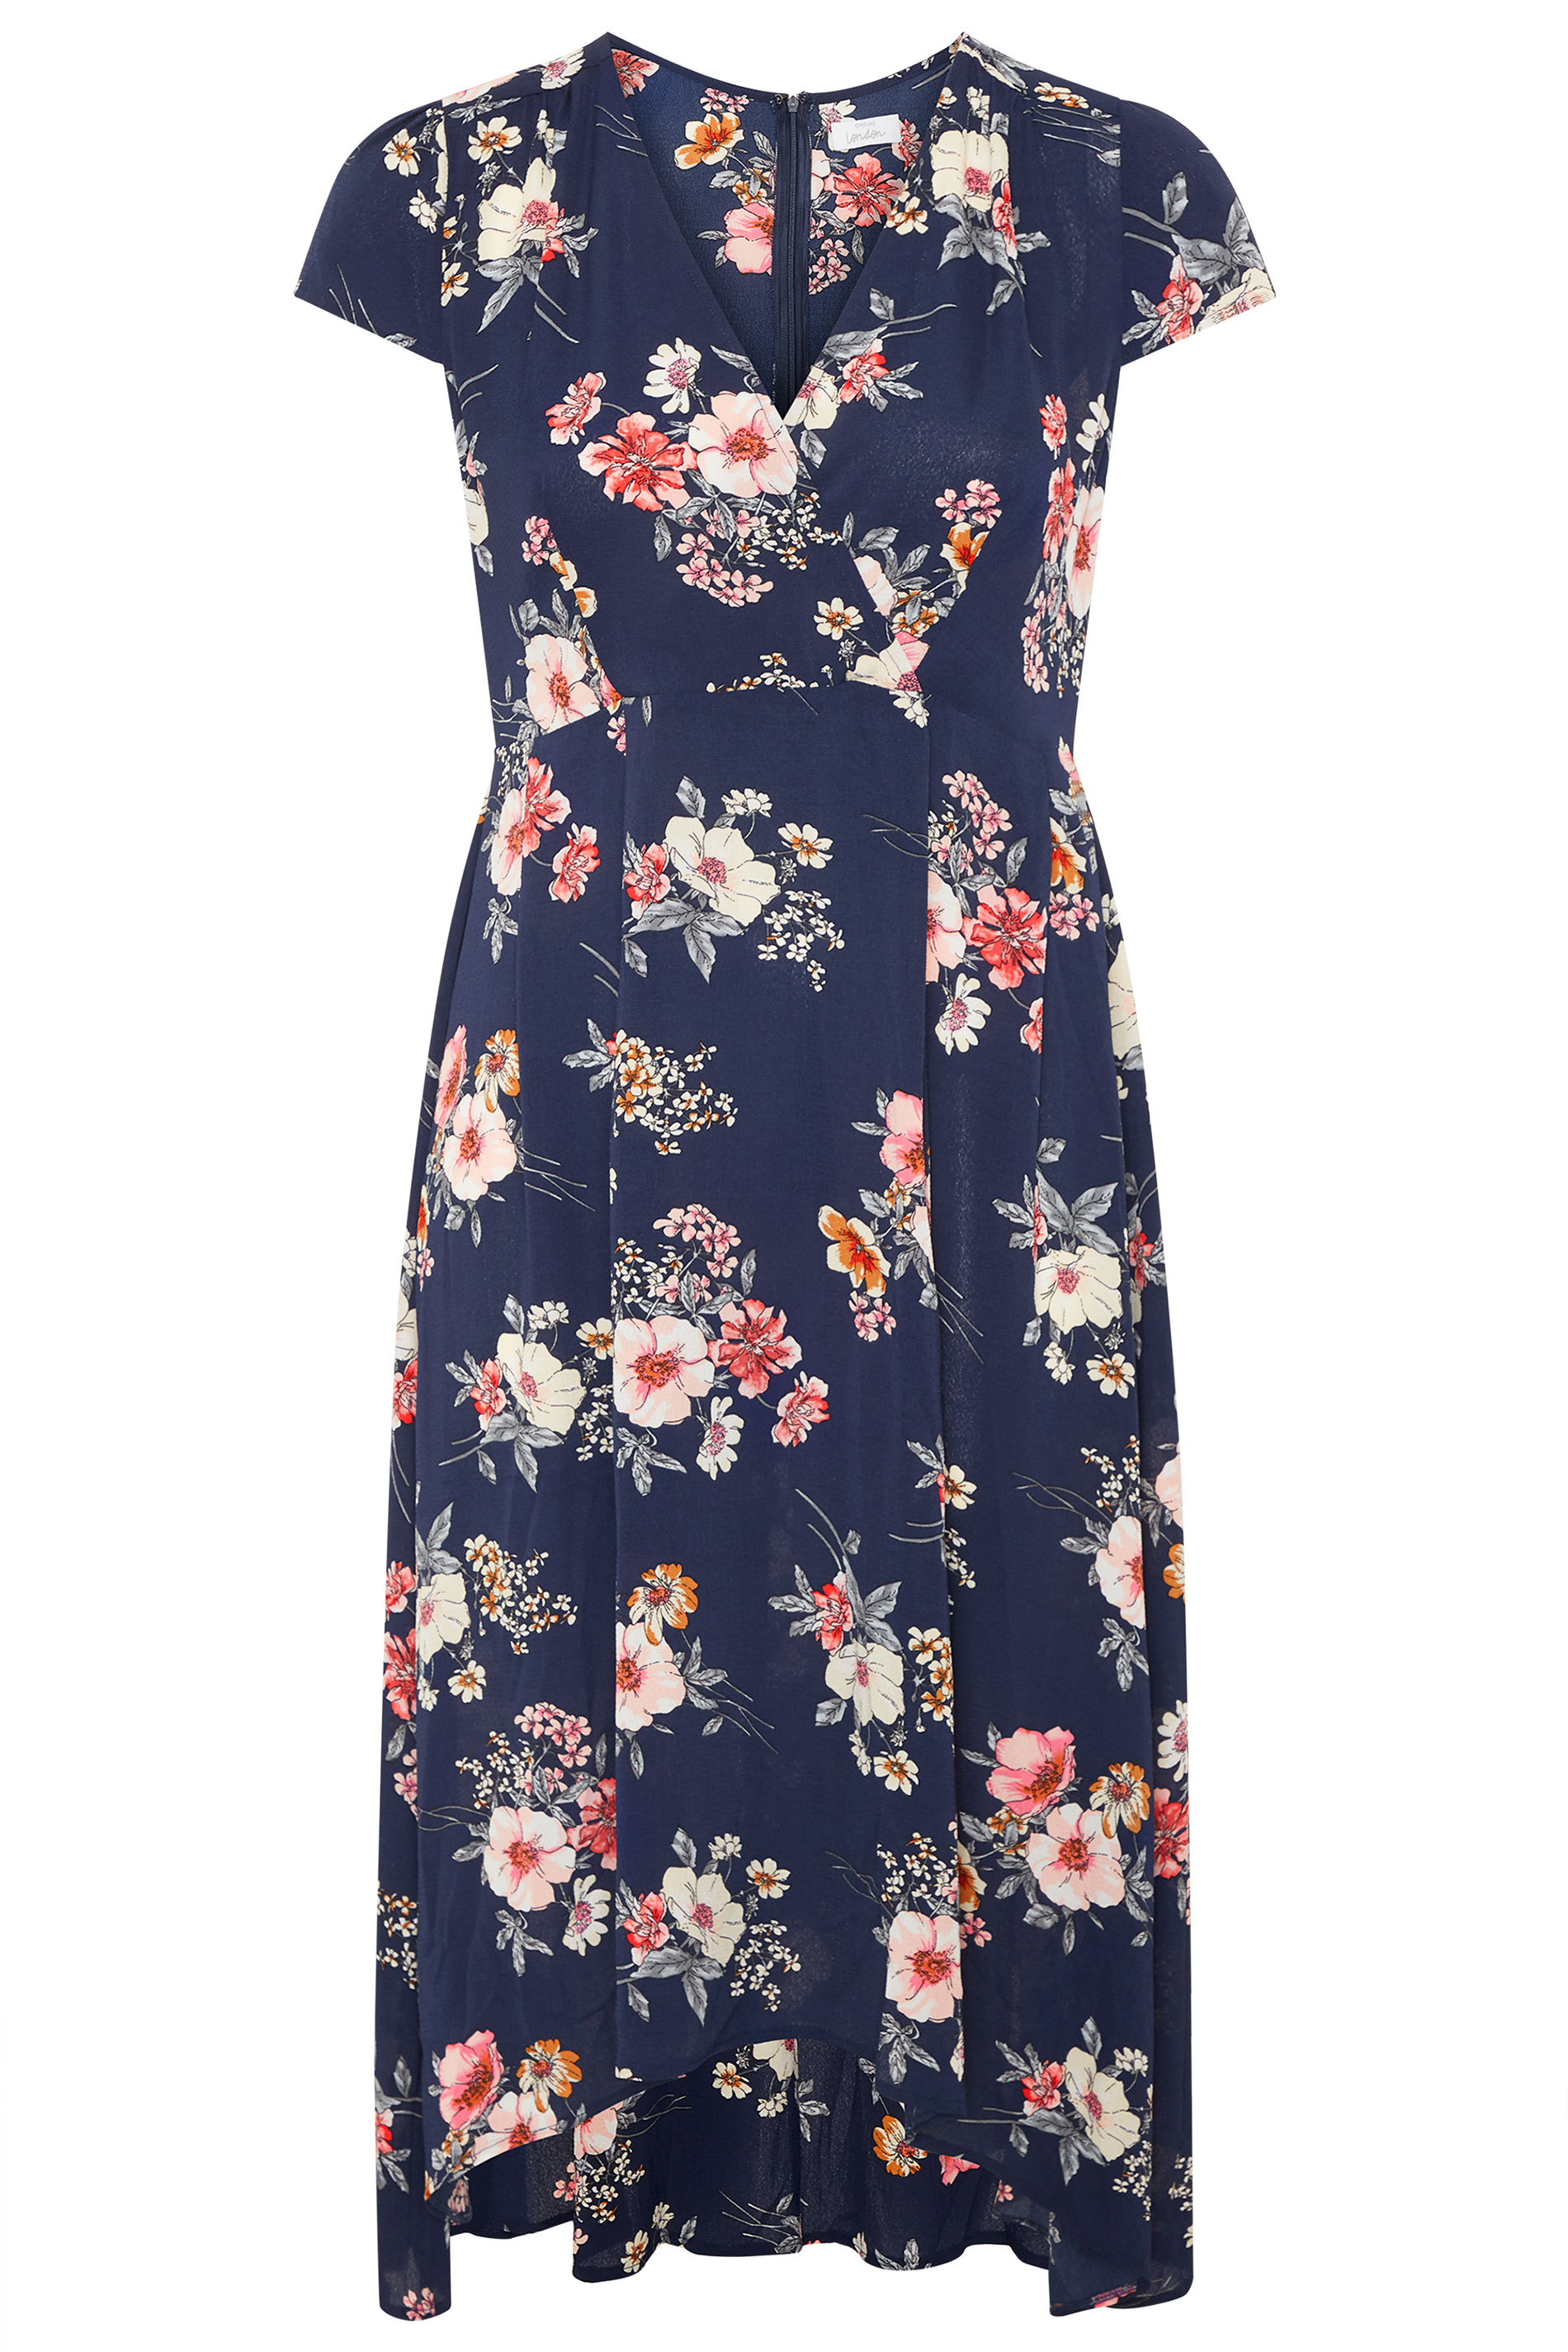 YOURS LONDON Navy & Pink Floral Wrap Dress | Yours Clothing